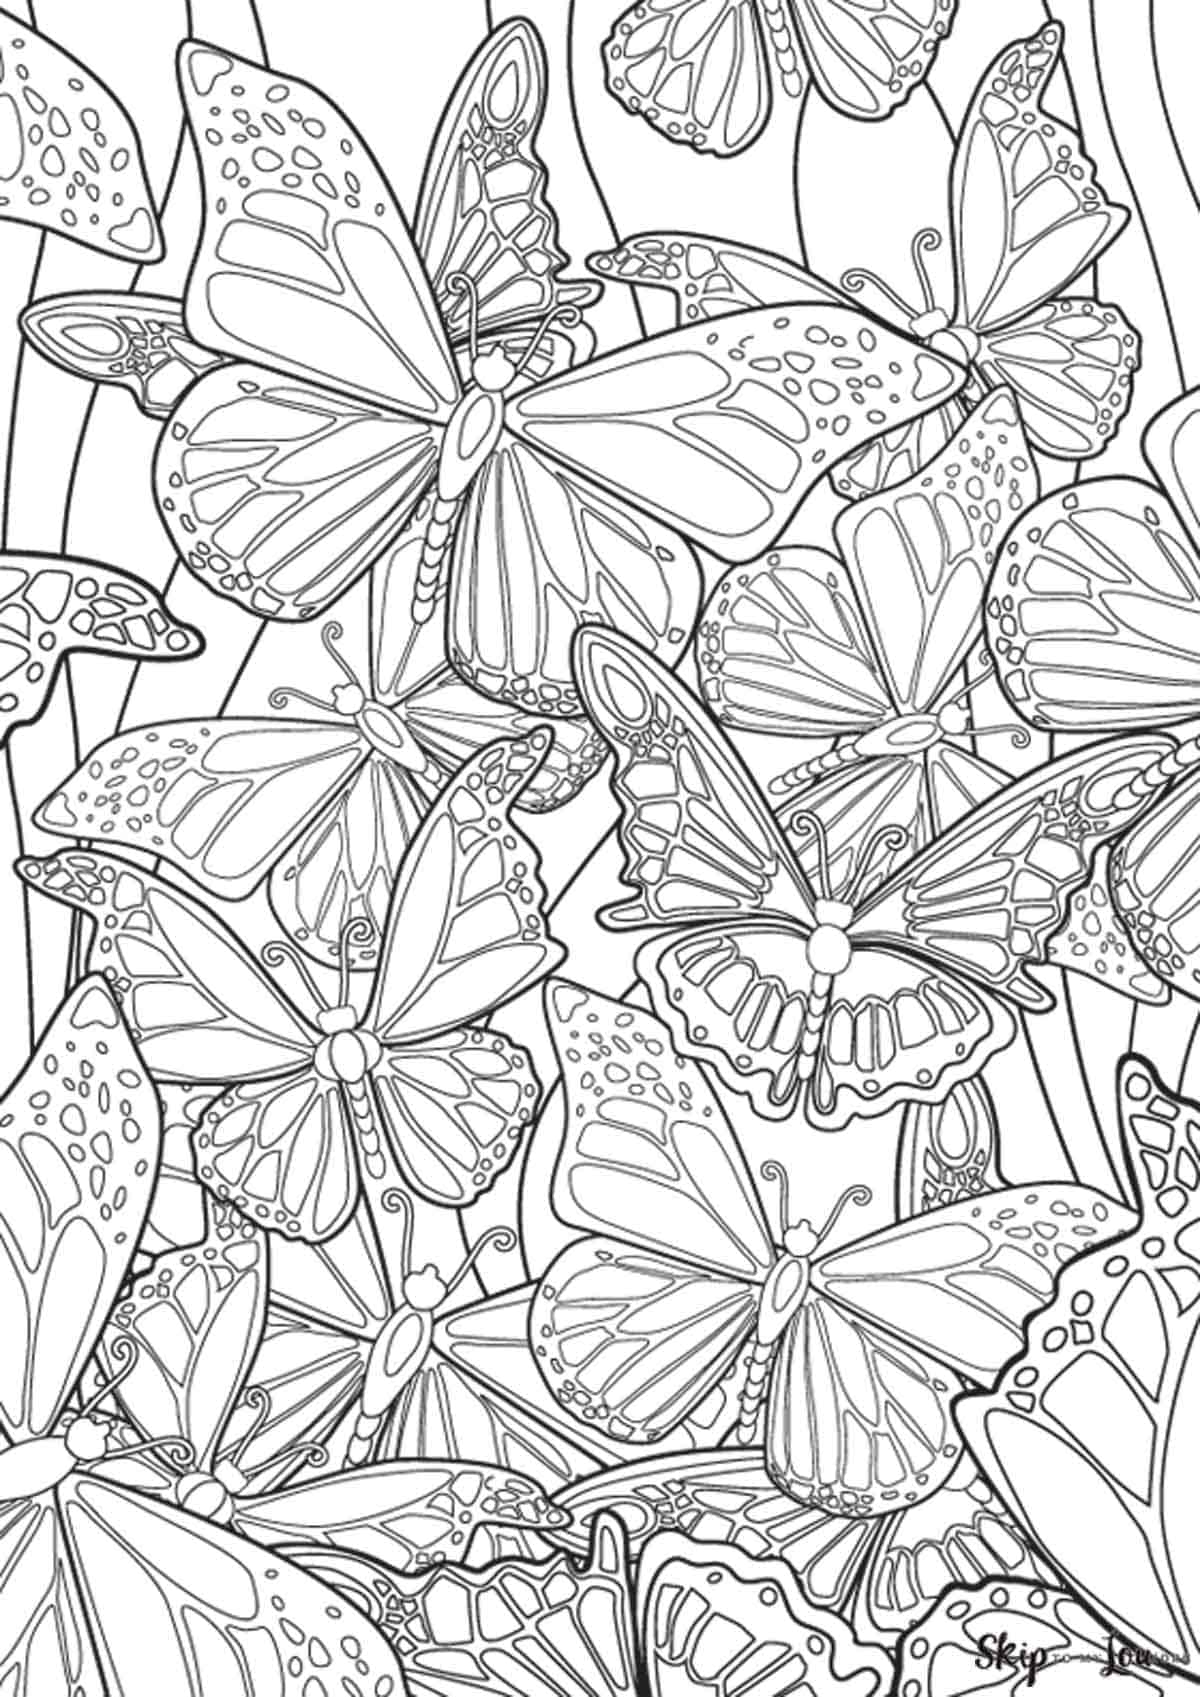 Beautiful butterfly coloring pages to download and print skip to my lou